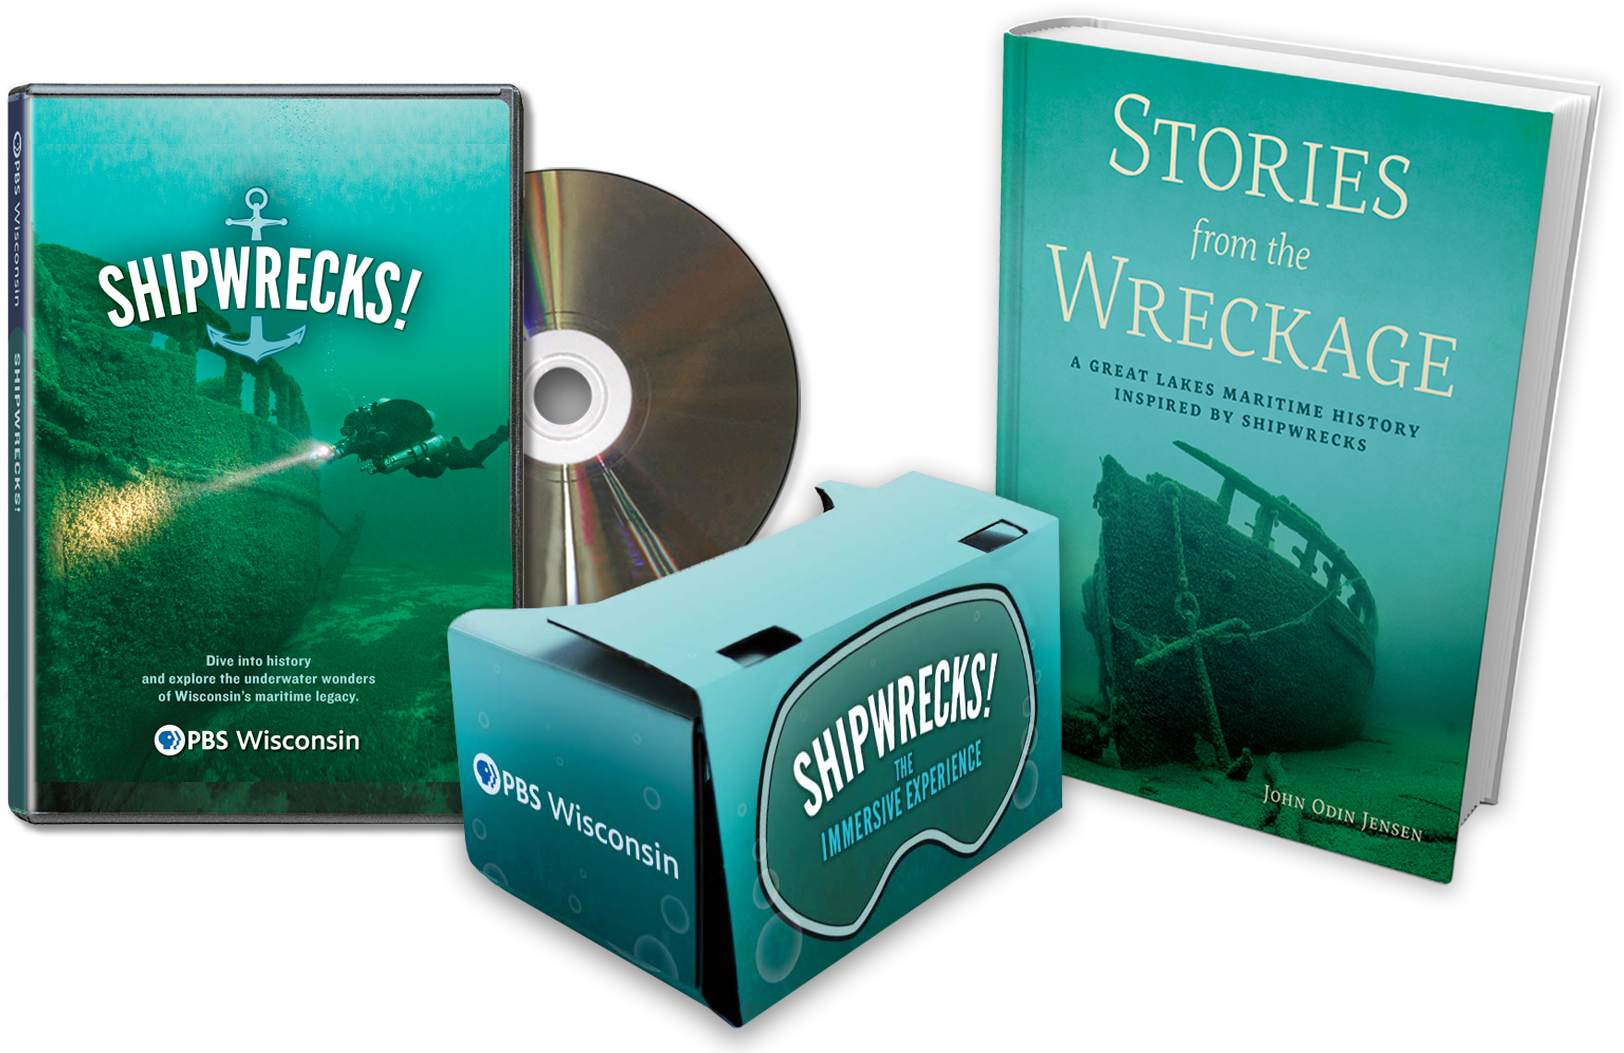 A photo composite illustration of a Shipwrecks! DVD, a book and the carton for a VR cardboard viewer